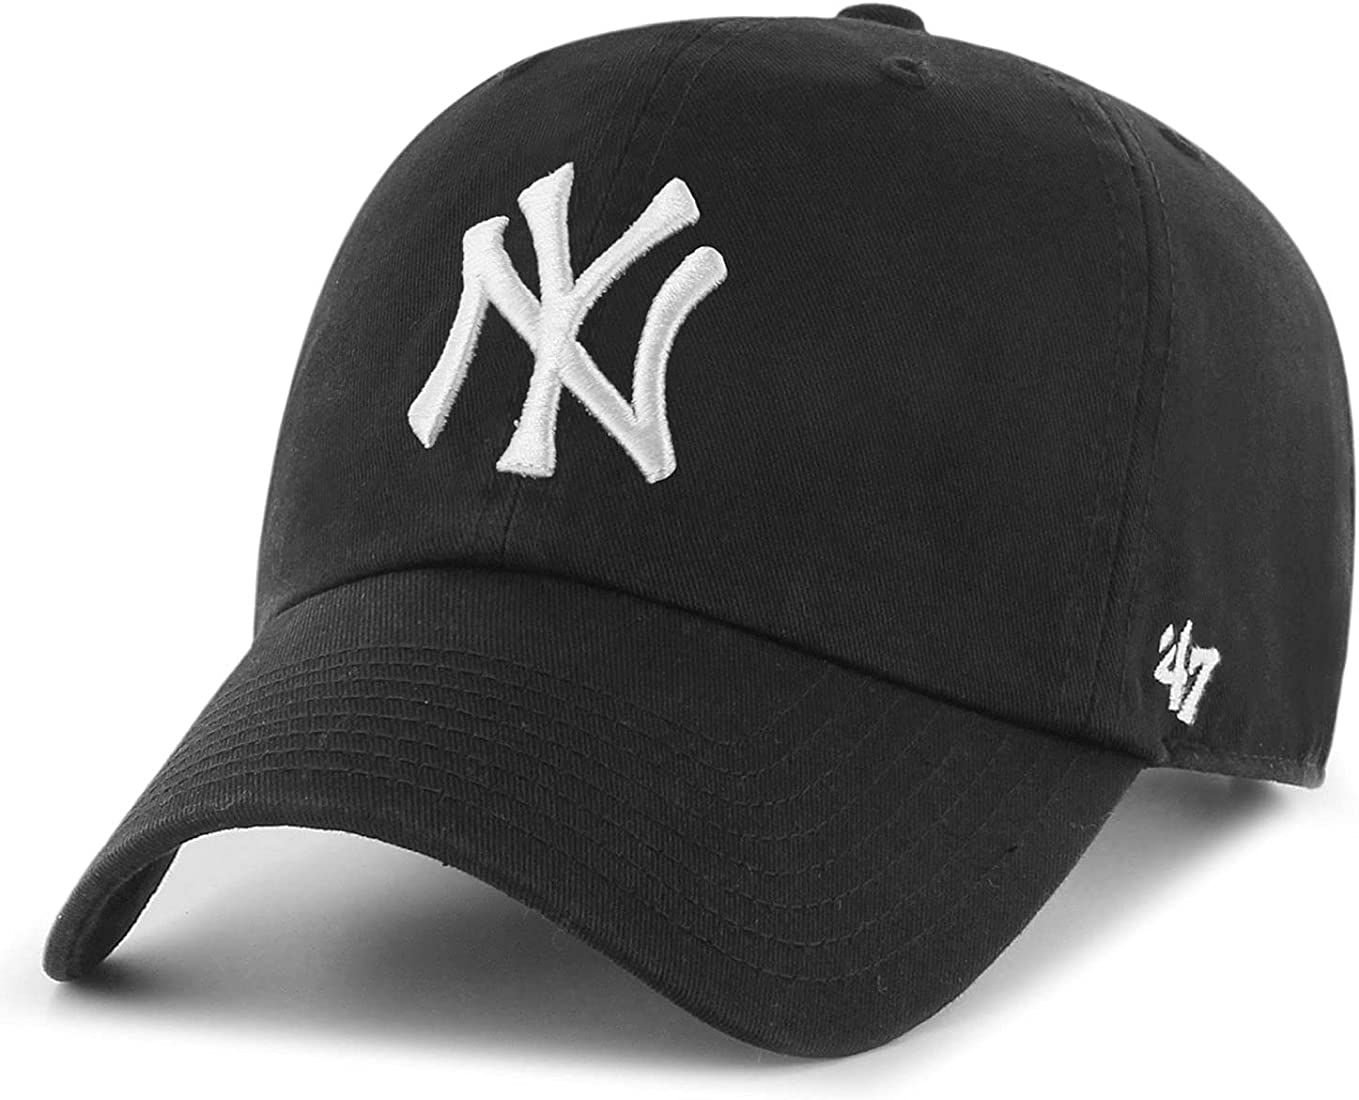 '47 MLB Natural Clean Up Adjustable Hat Cap, Adult One Size | Amazon (US)